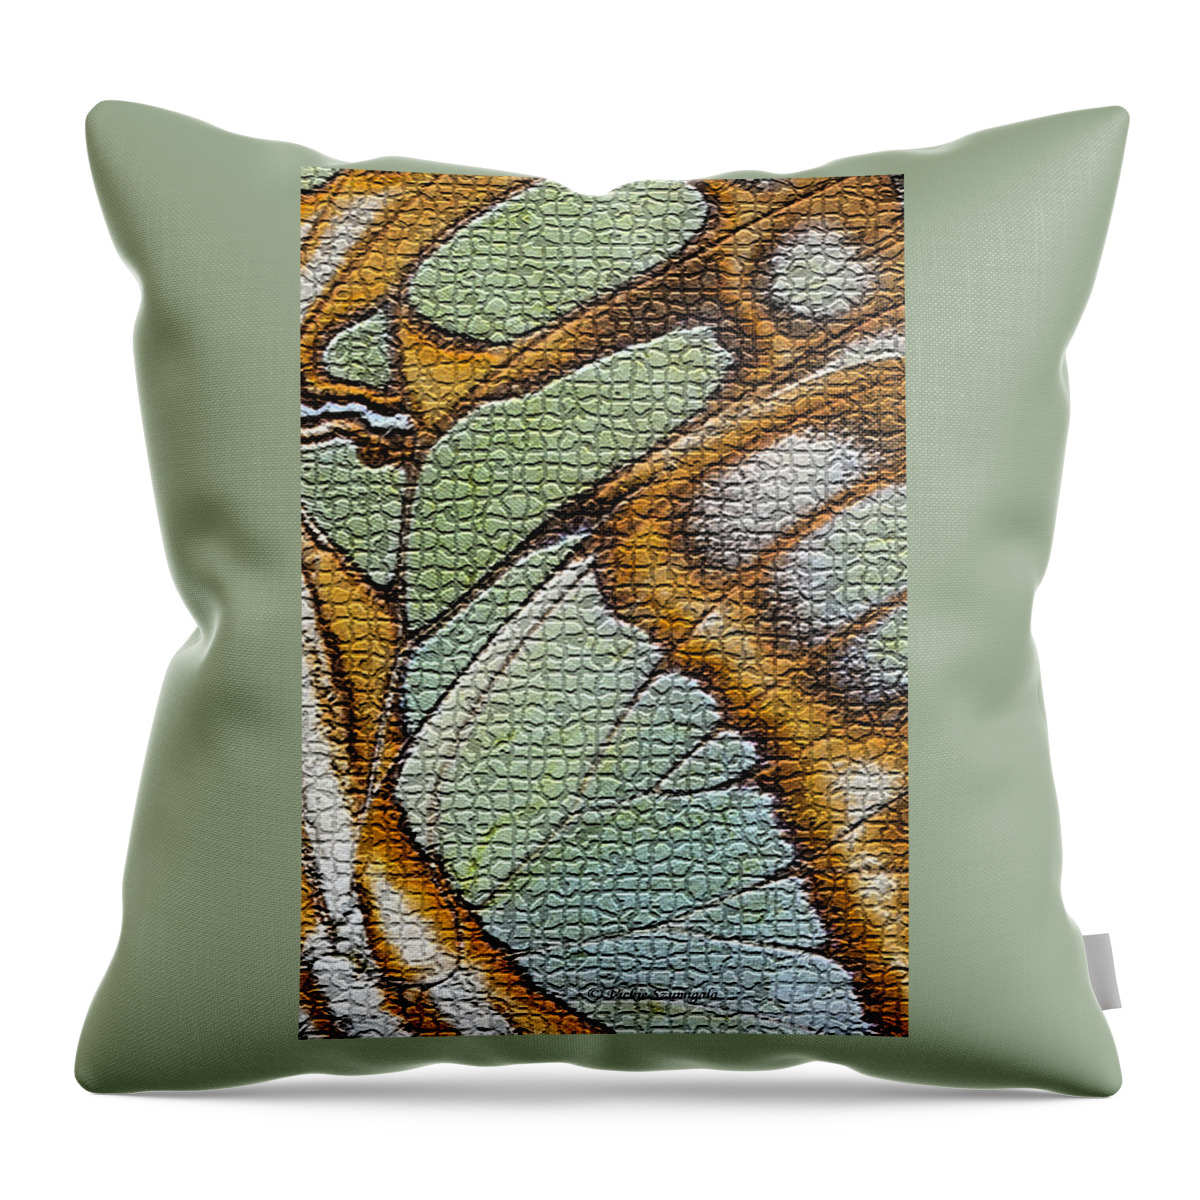 Art Throw Pillow featuring the photograph Body Art by Vickie Szumigala